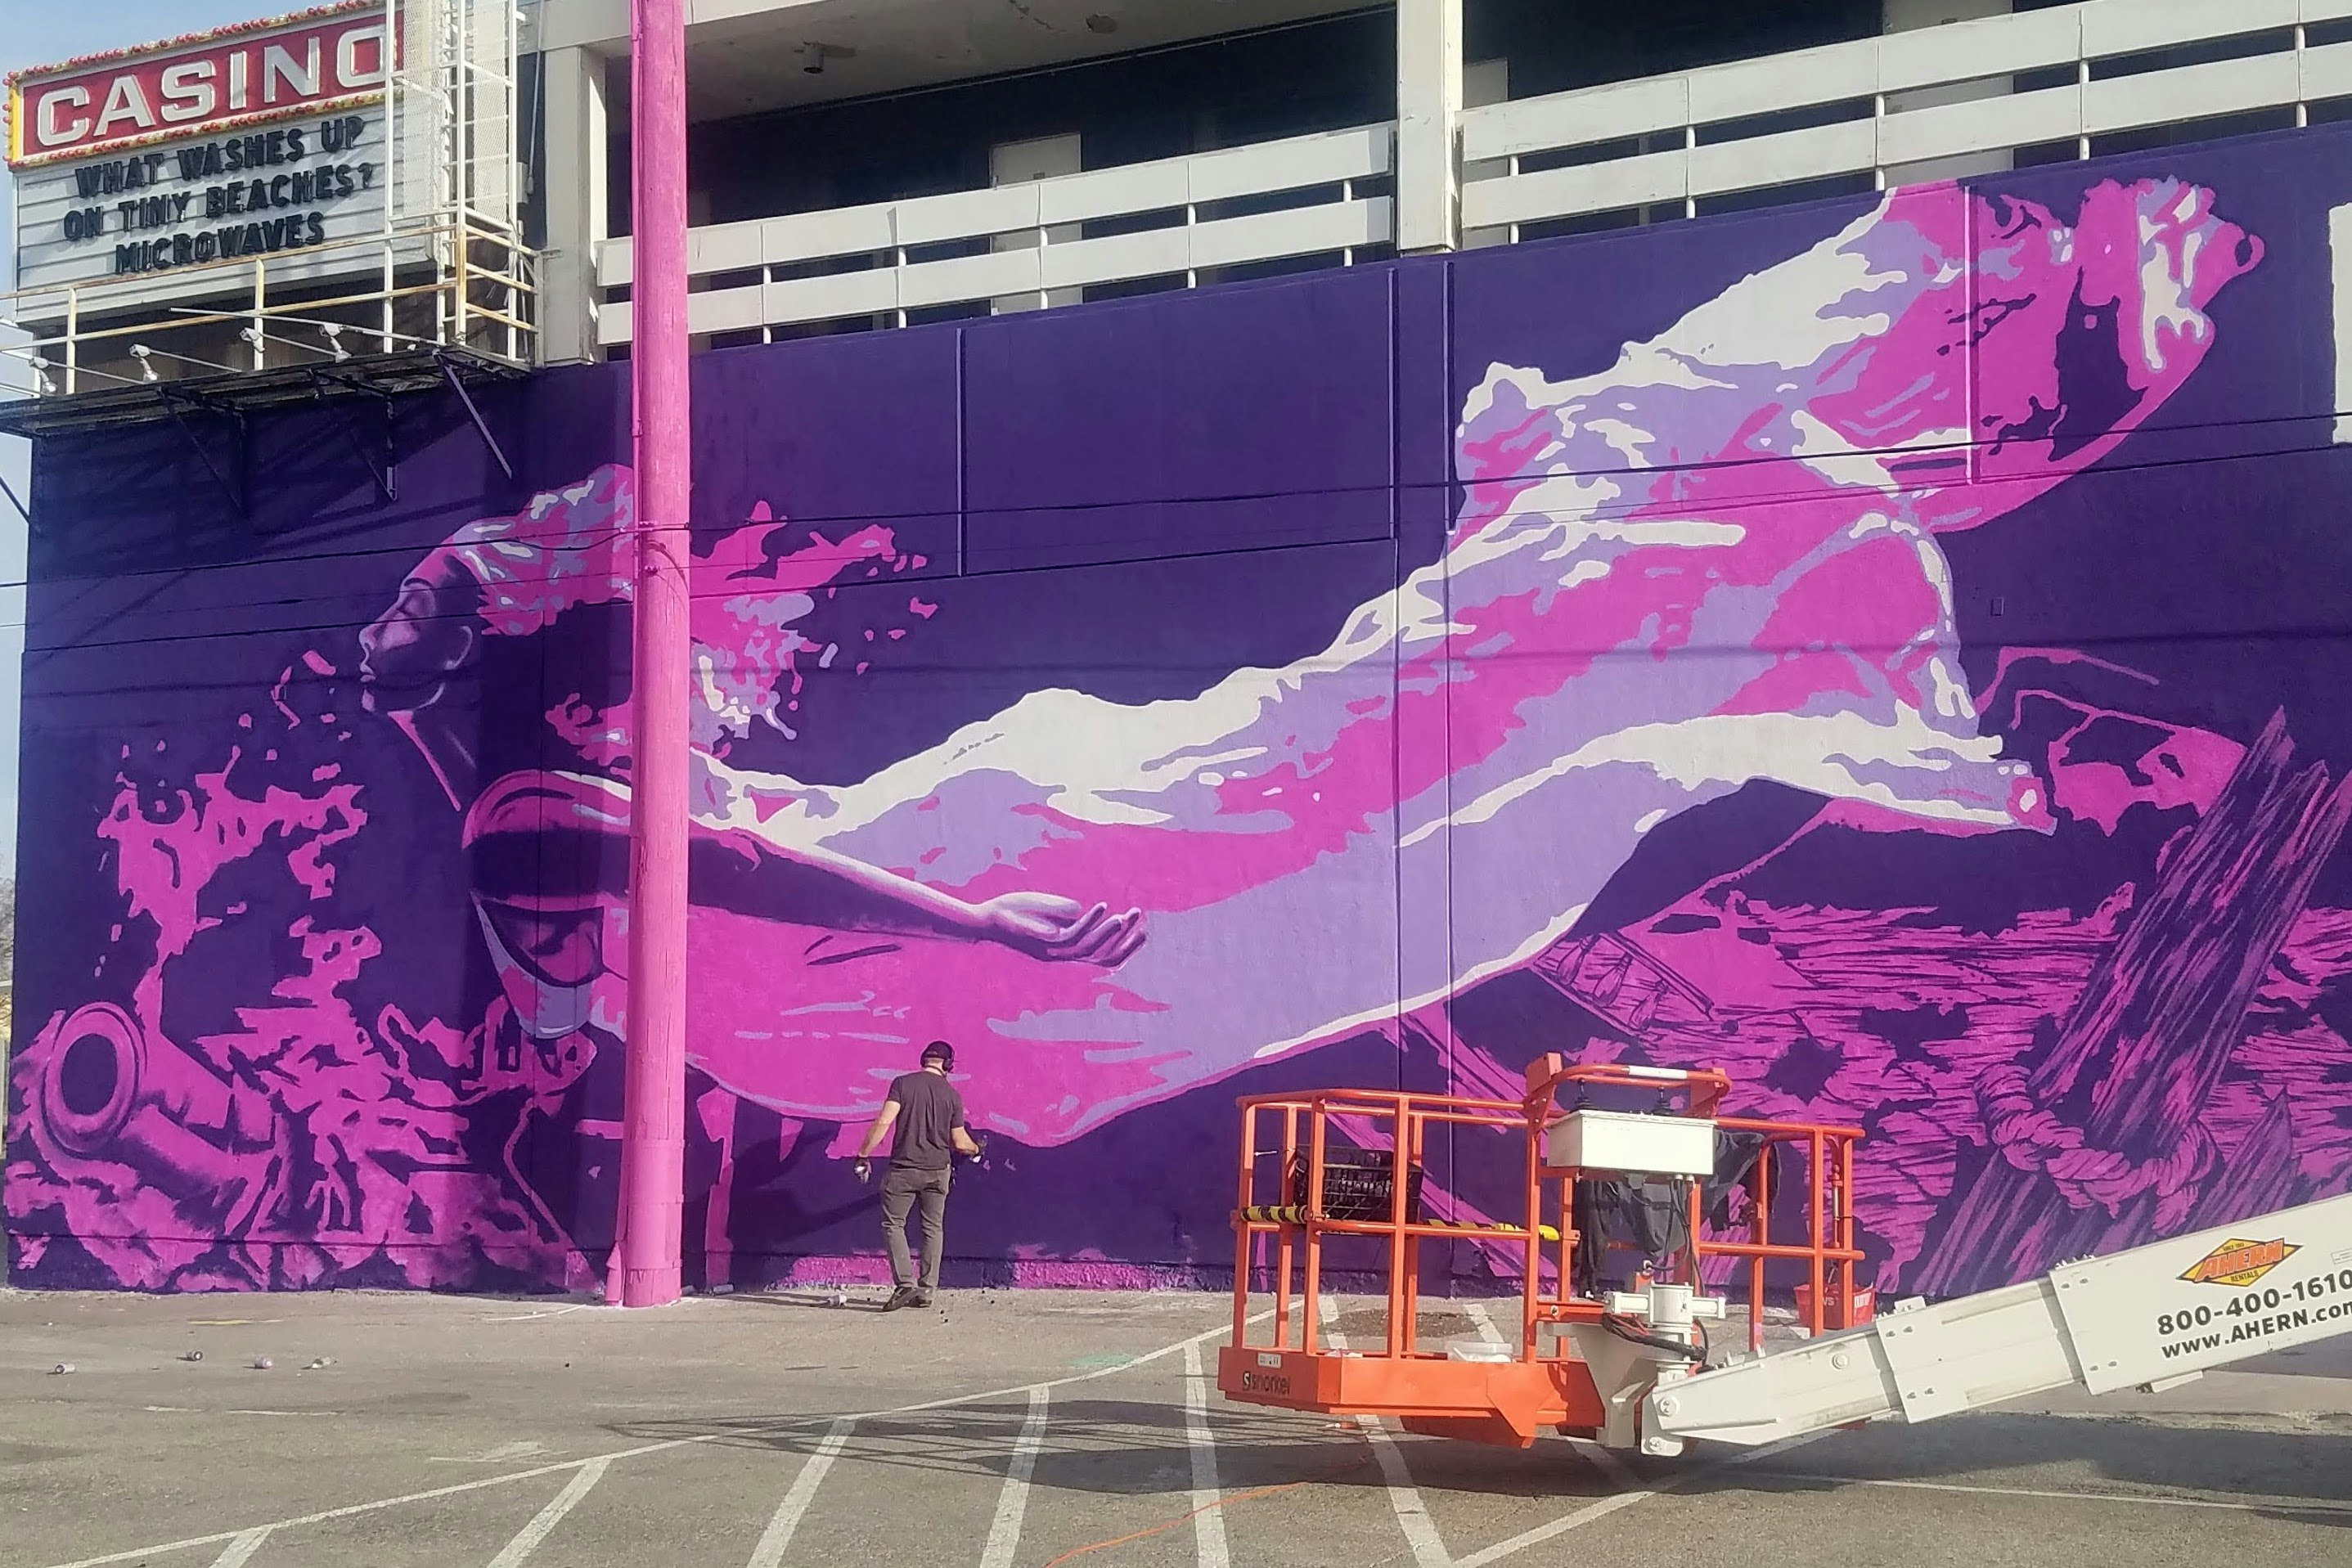 Artist Aware adding the final touches to a huge purple and pink mural; it depicts what appears to be a woman swimming in a floaty gown.